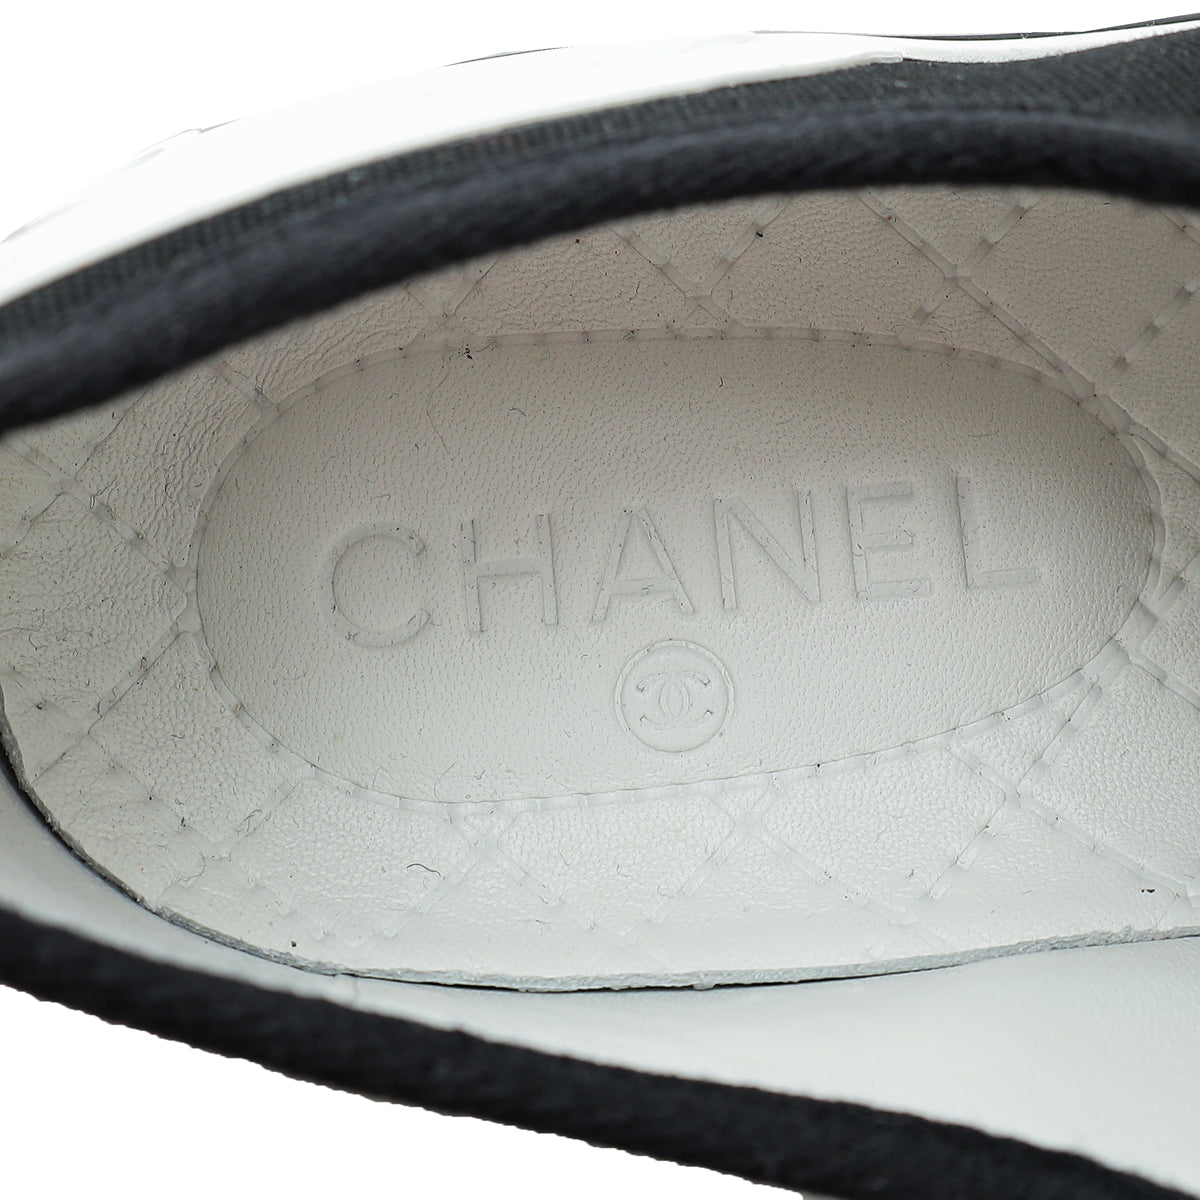 Chanel Bicolor Lace Up Low Top Sneakers 41.5